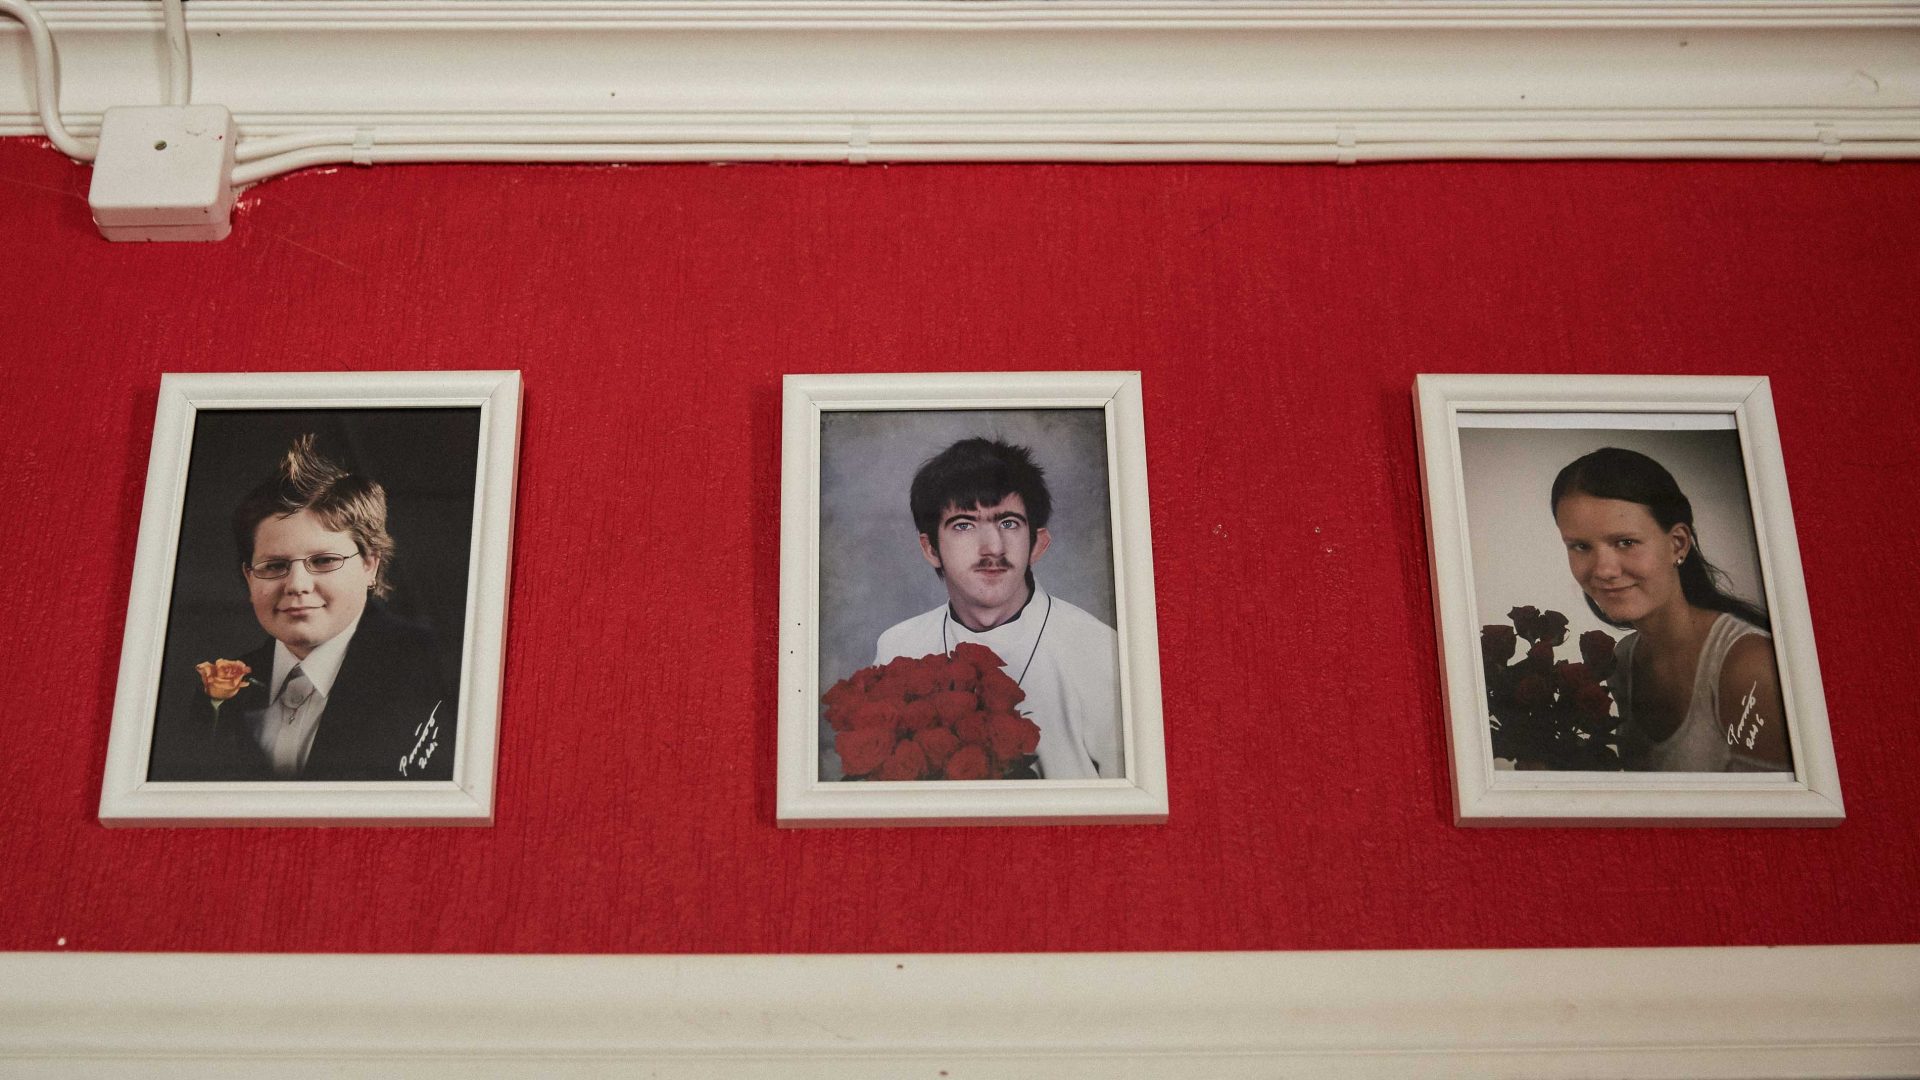 Photos hang on the wall of Mirtsu and Sirppi's home in Tuusula, southern Finland.